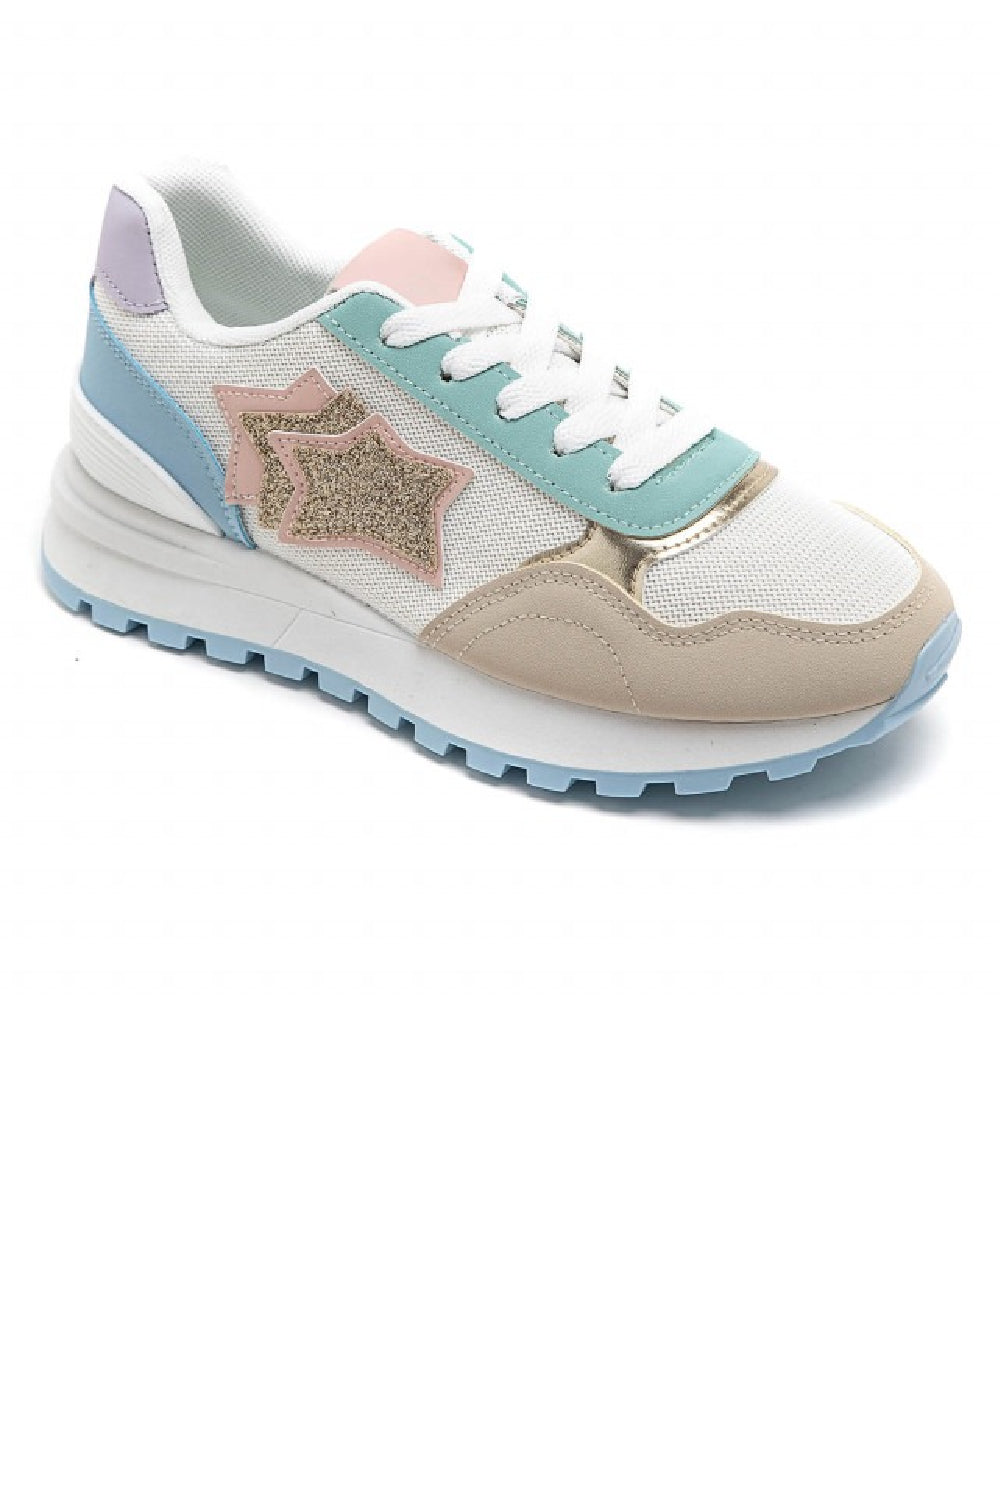 BEIGE FLAT LACE UP SIDE DETAIL SNEAKERS TRAINERS